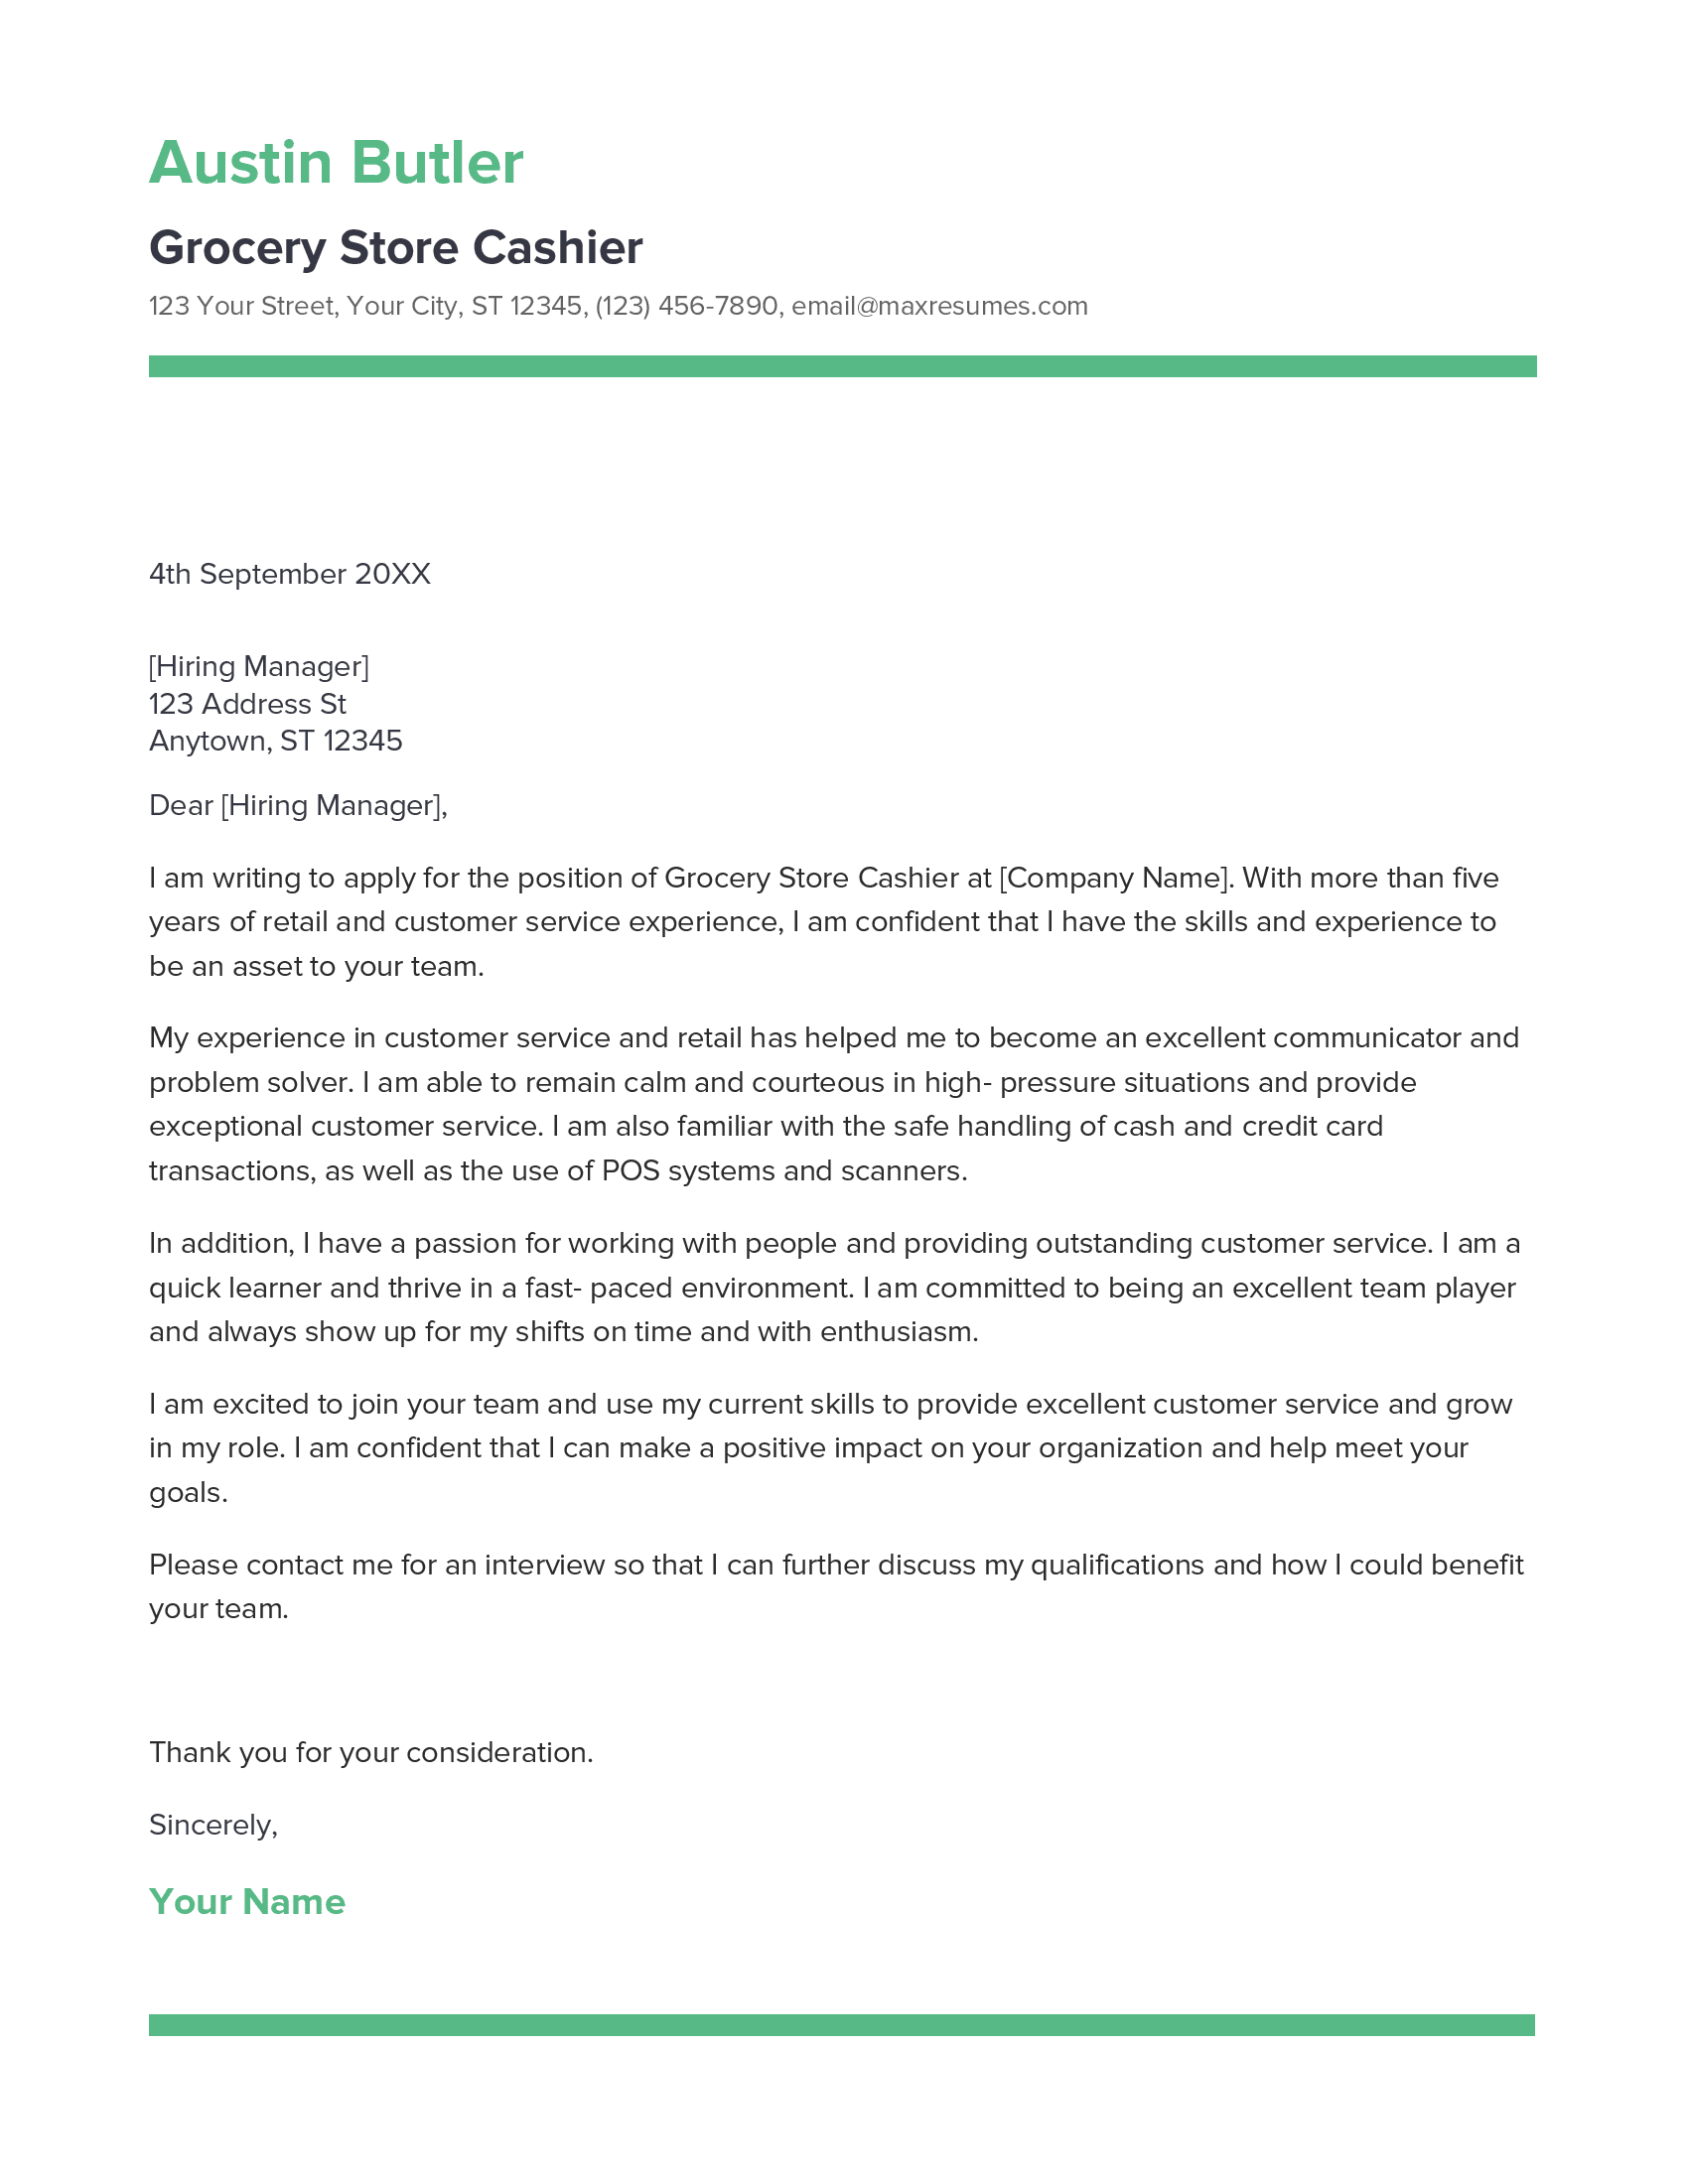 Grocery Store Cashier Cover Letter Example